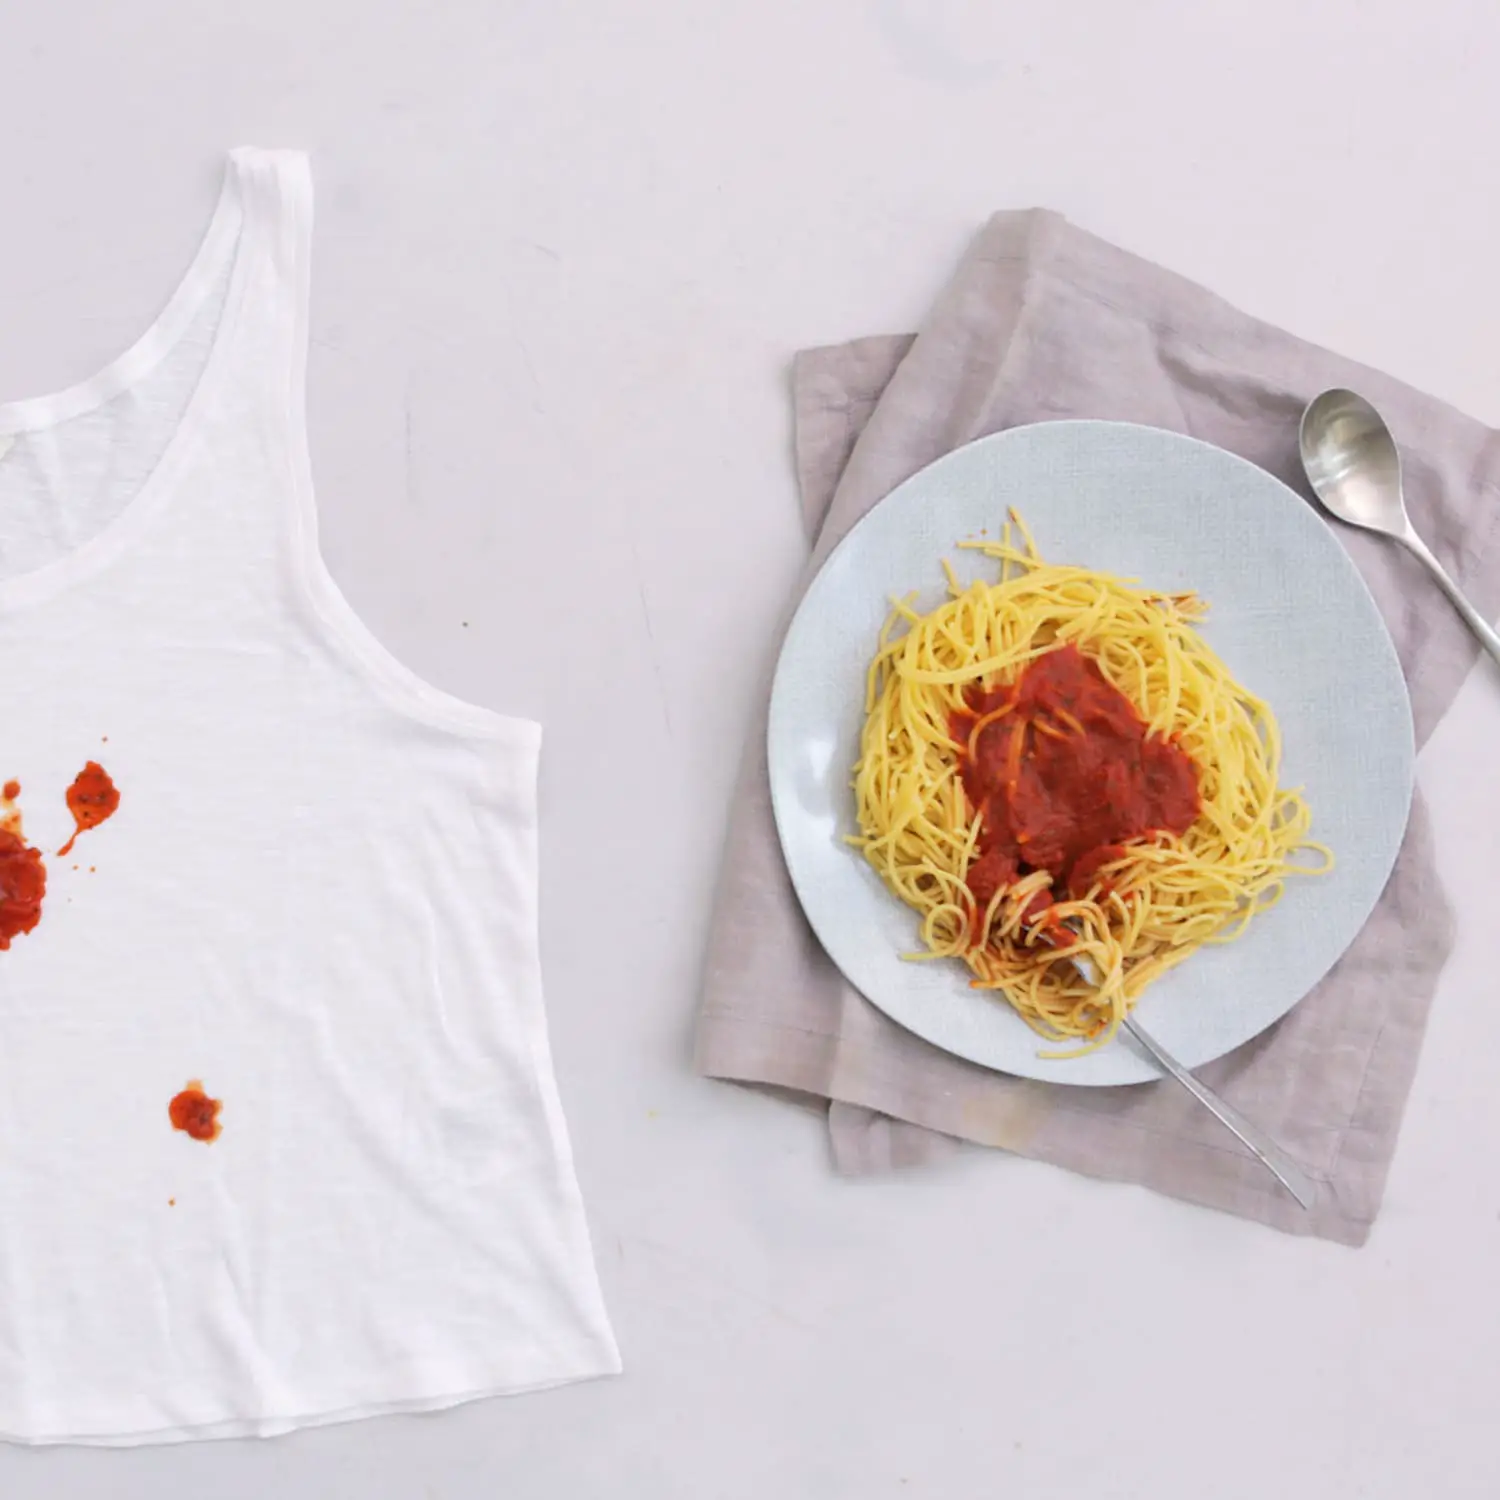 How To Remove Ketchup Stains From Colored Clothes